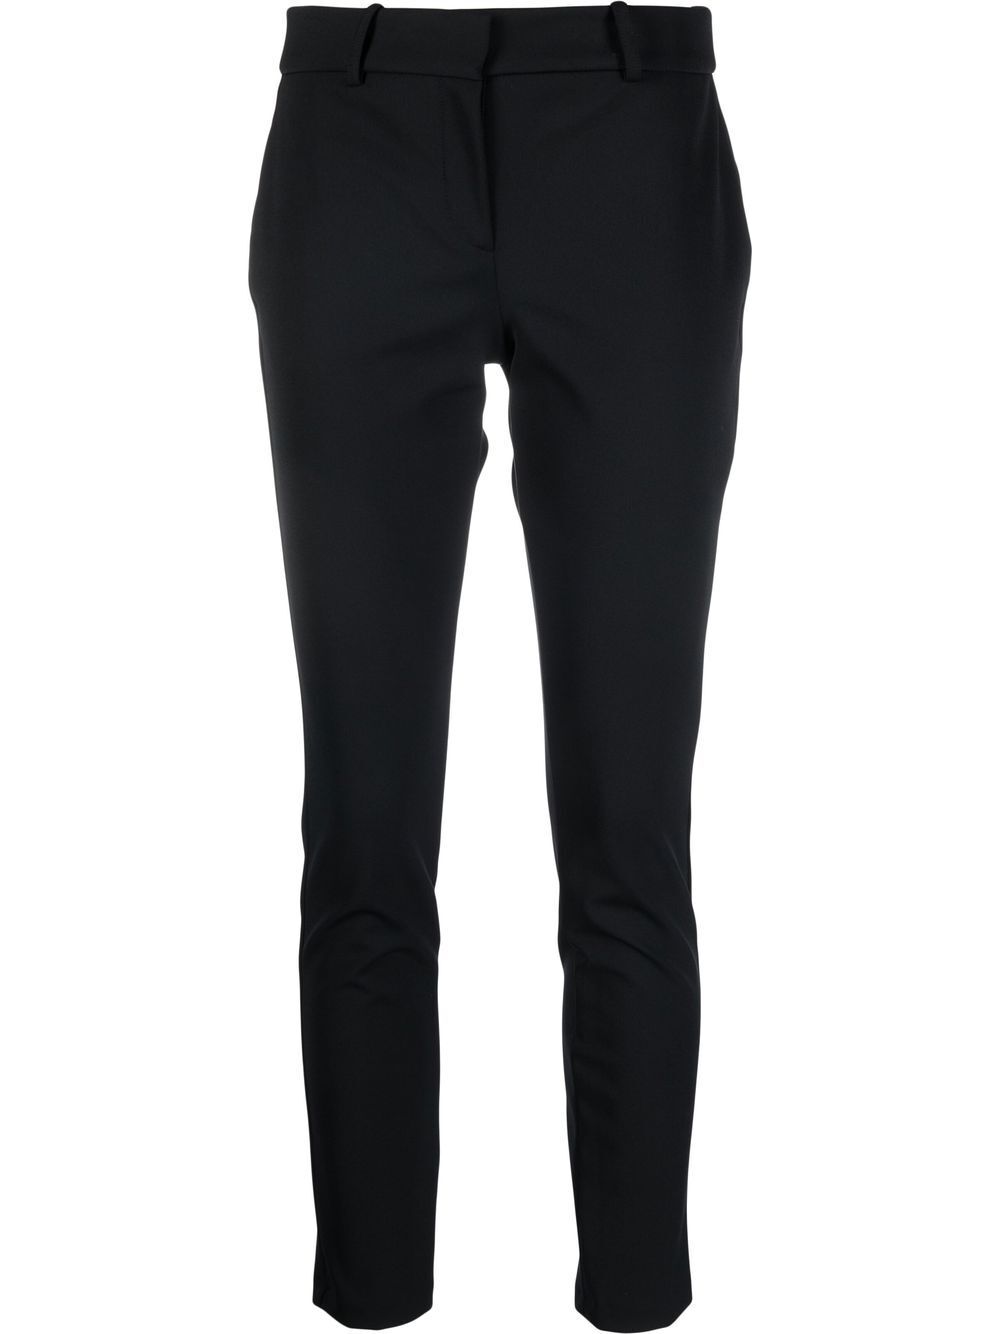 ERMANNO FIRENZE slim-fit tailored trousers - Black